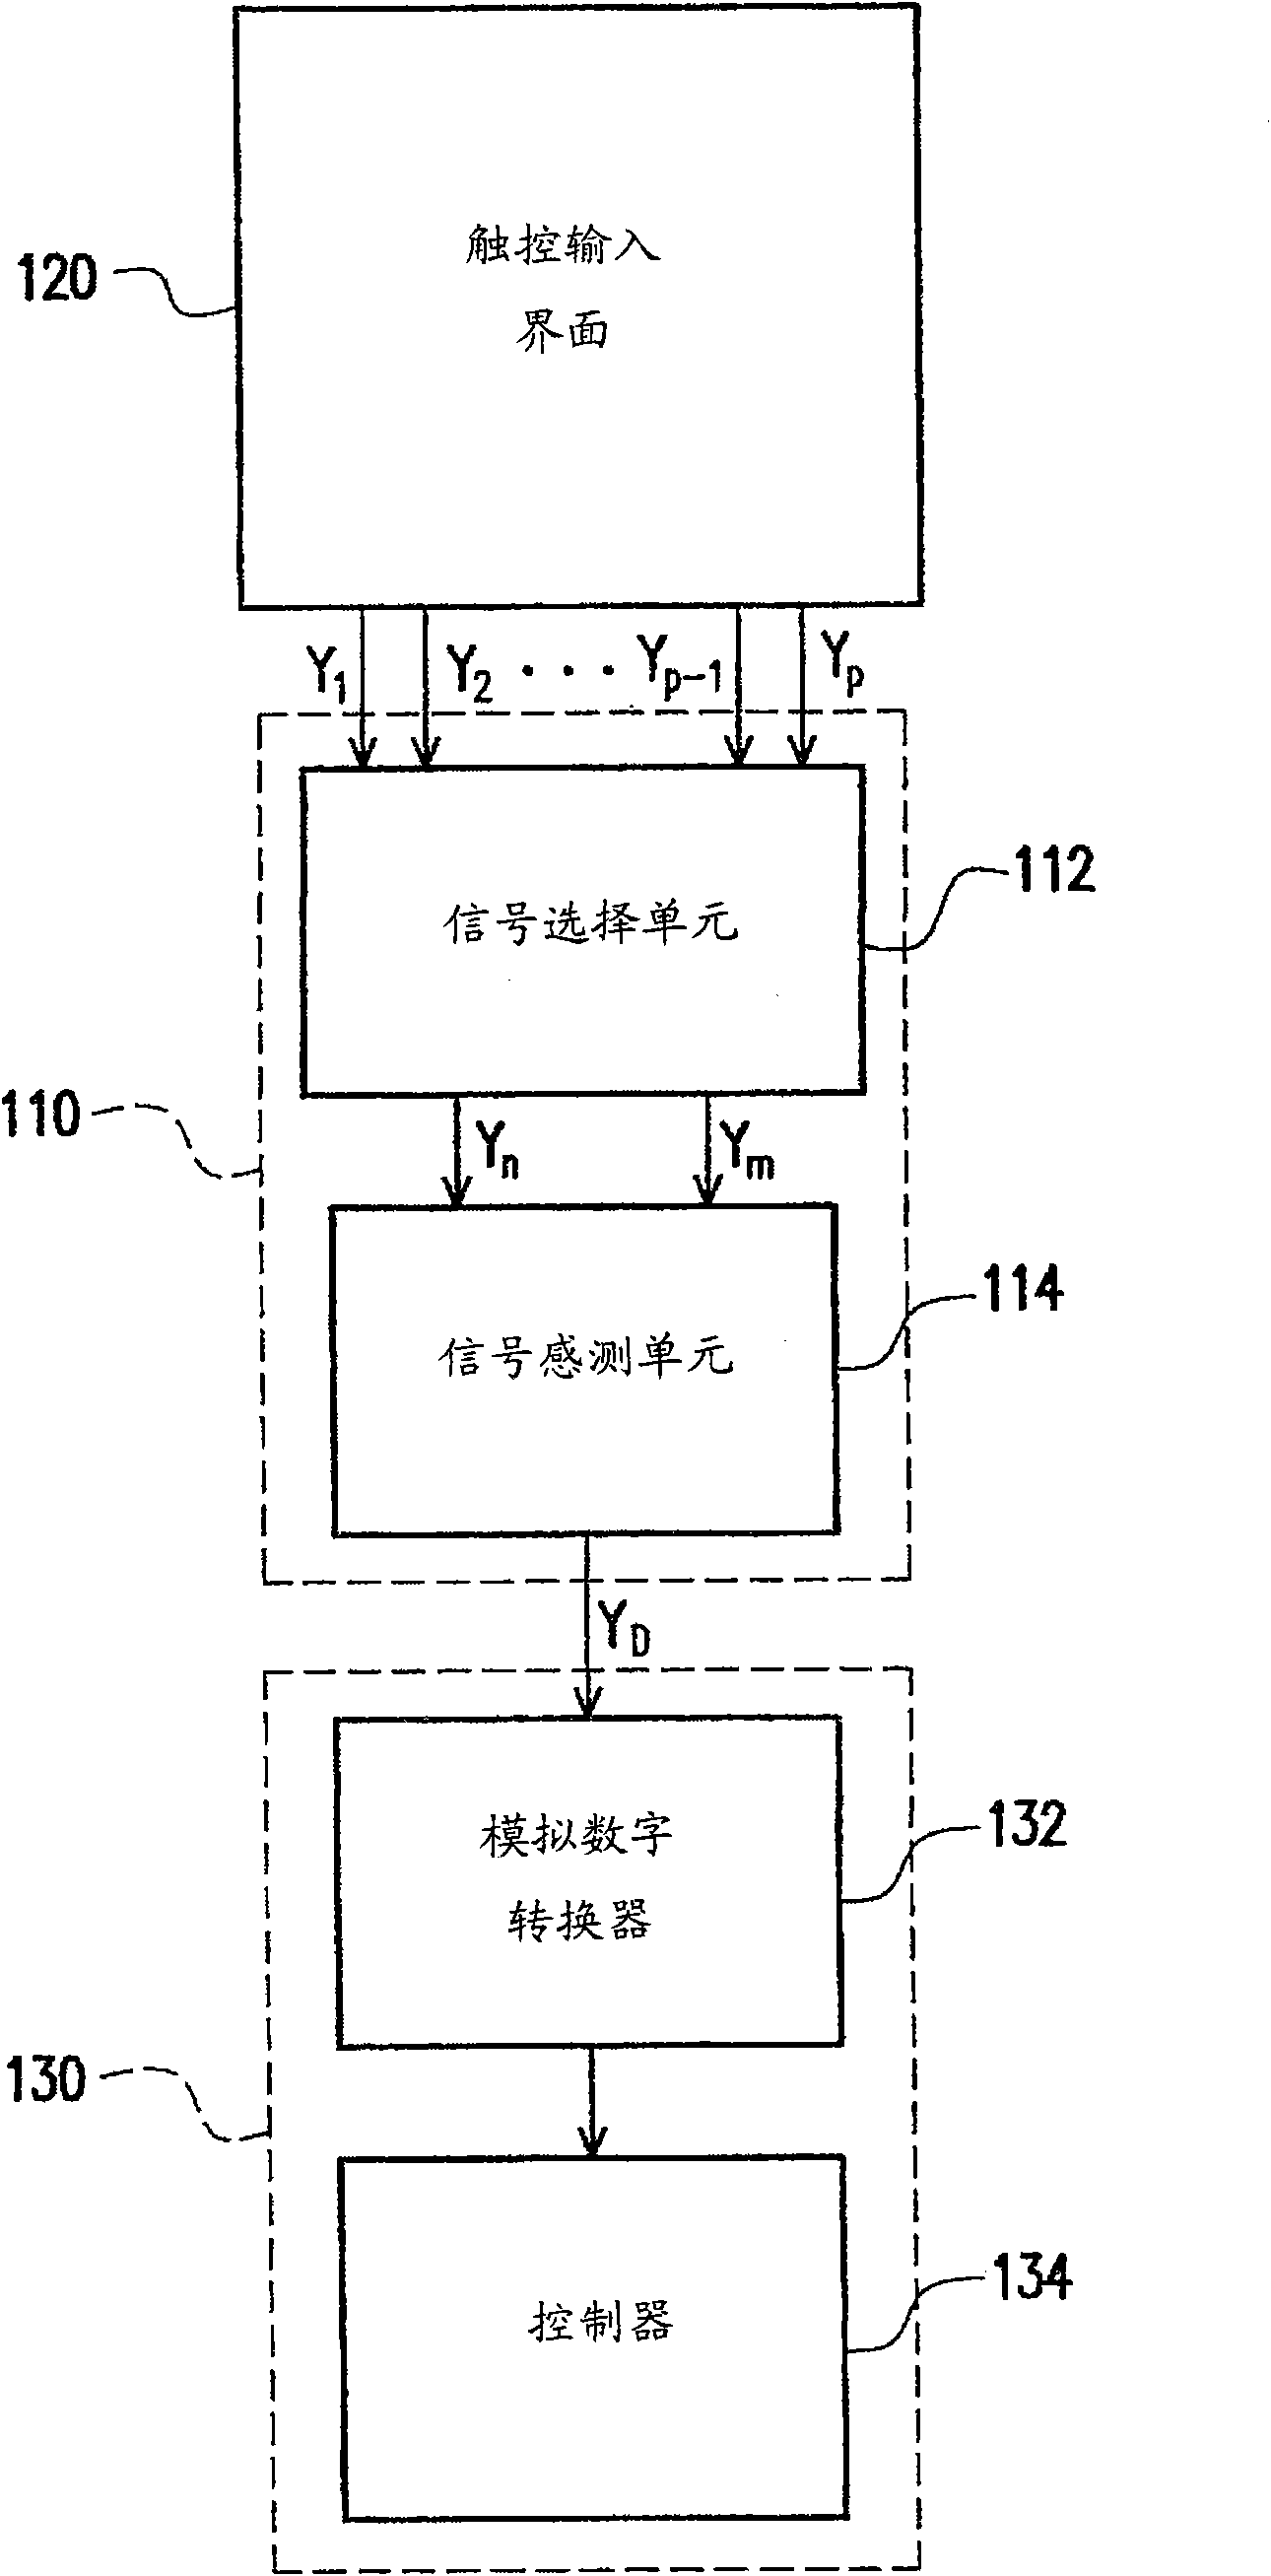 Touch-control sensing system, capacitance sensing circuit and capacitance sensing method